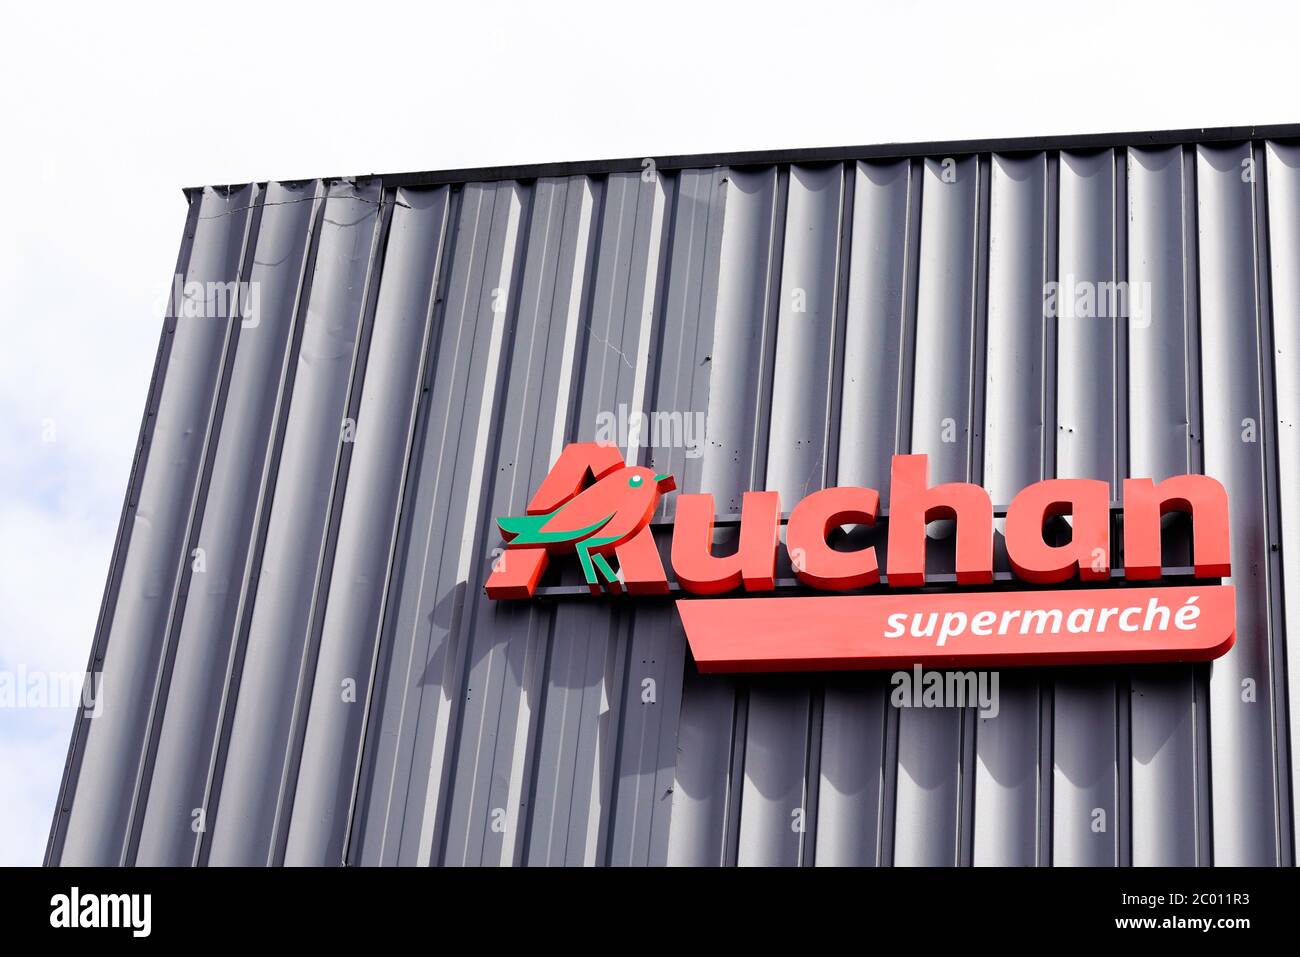 Bordeaux , Aquitaine / France - 06 06 2020 : Auchan supermarche logo sign of French group of supermarket Stock Photo